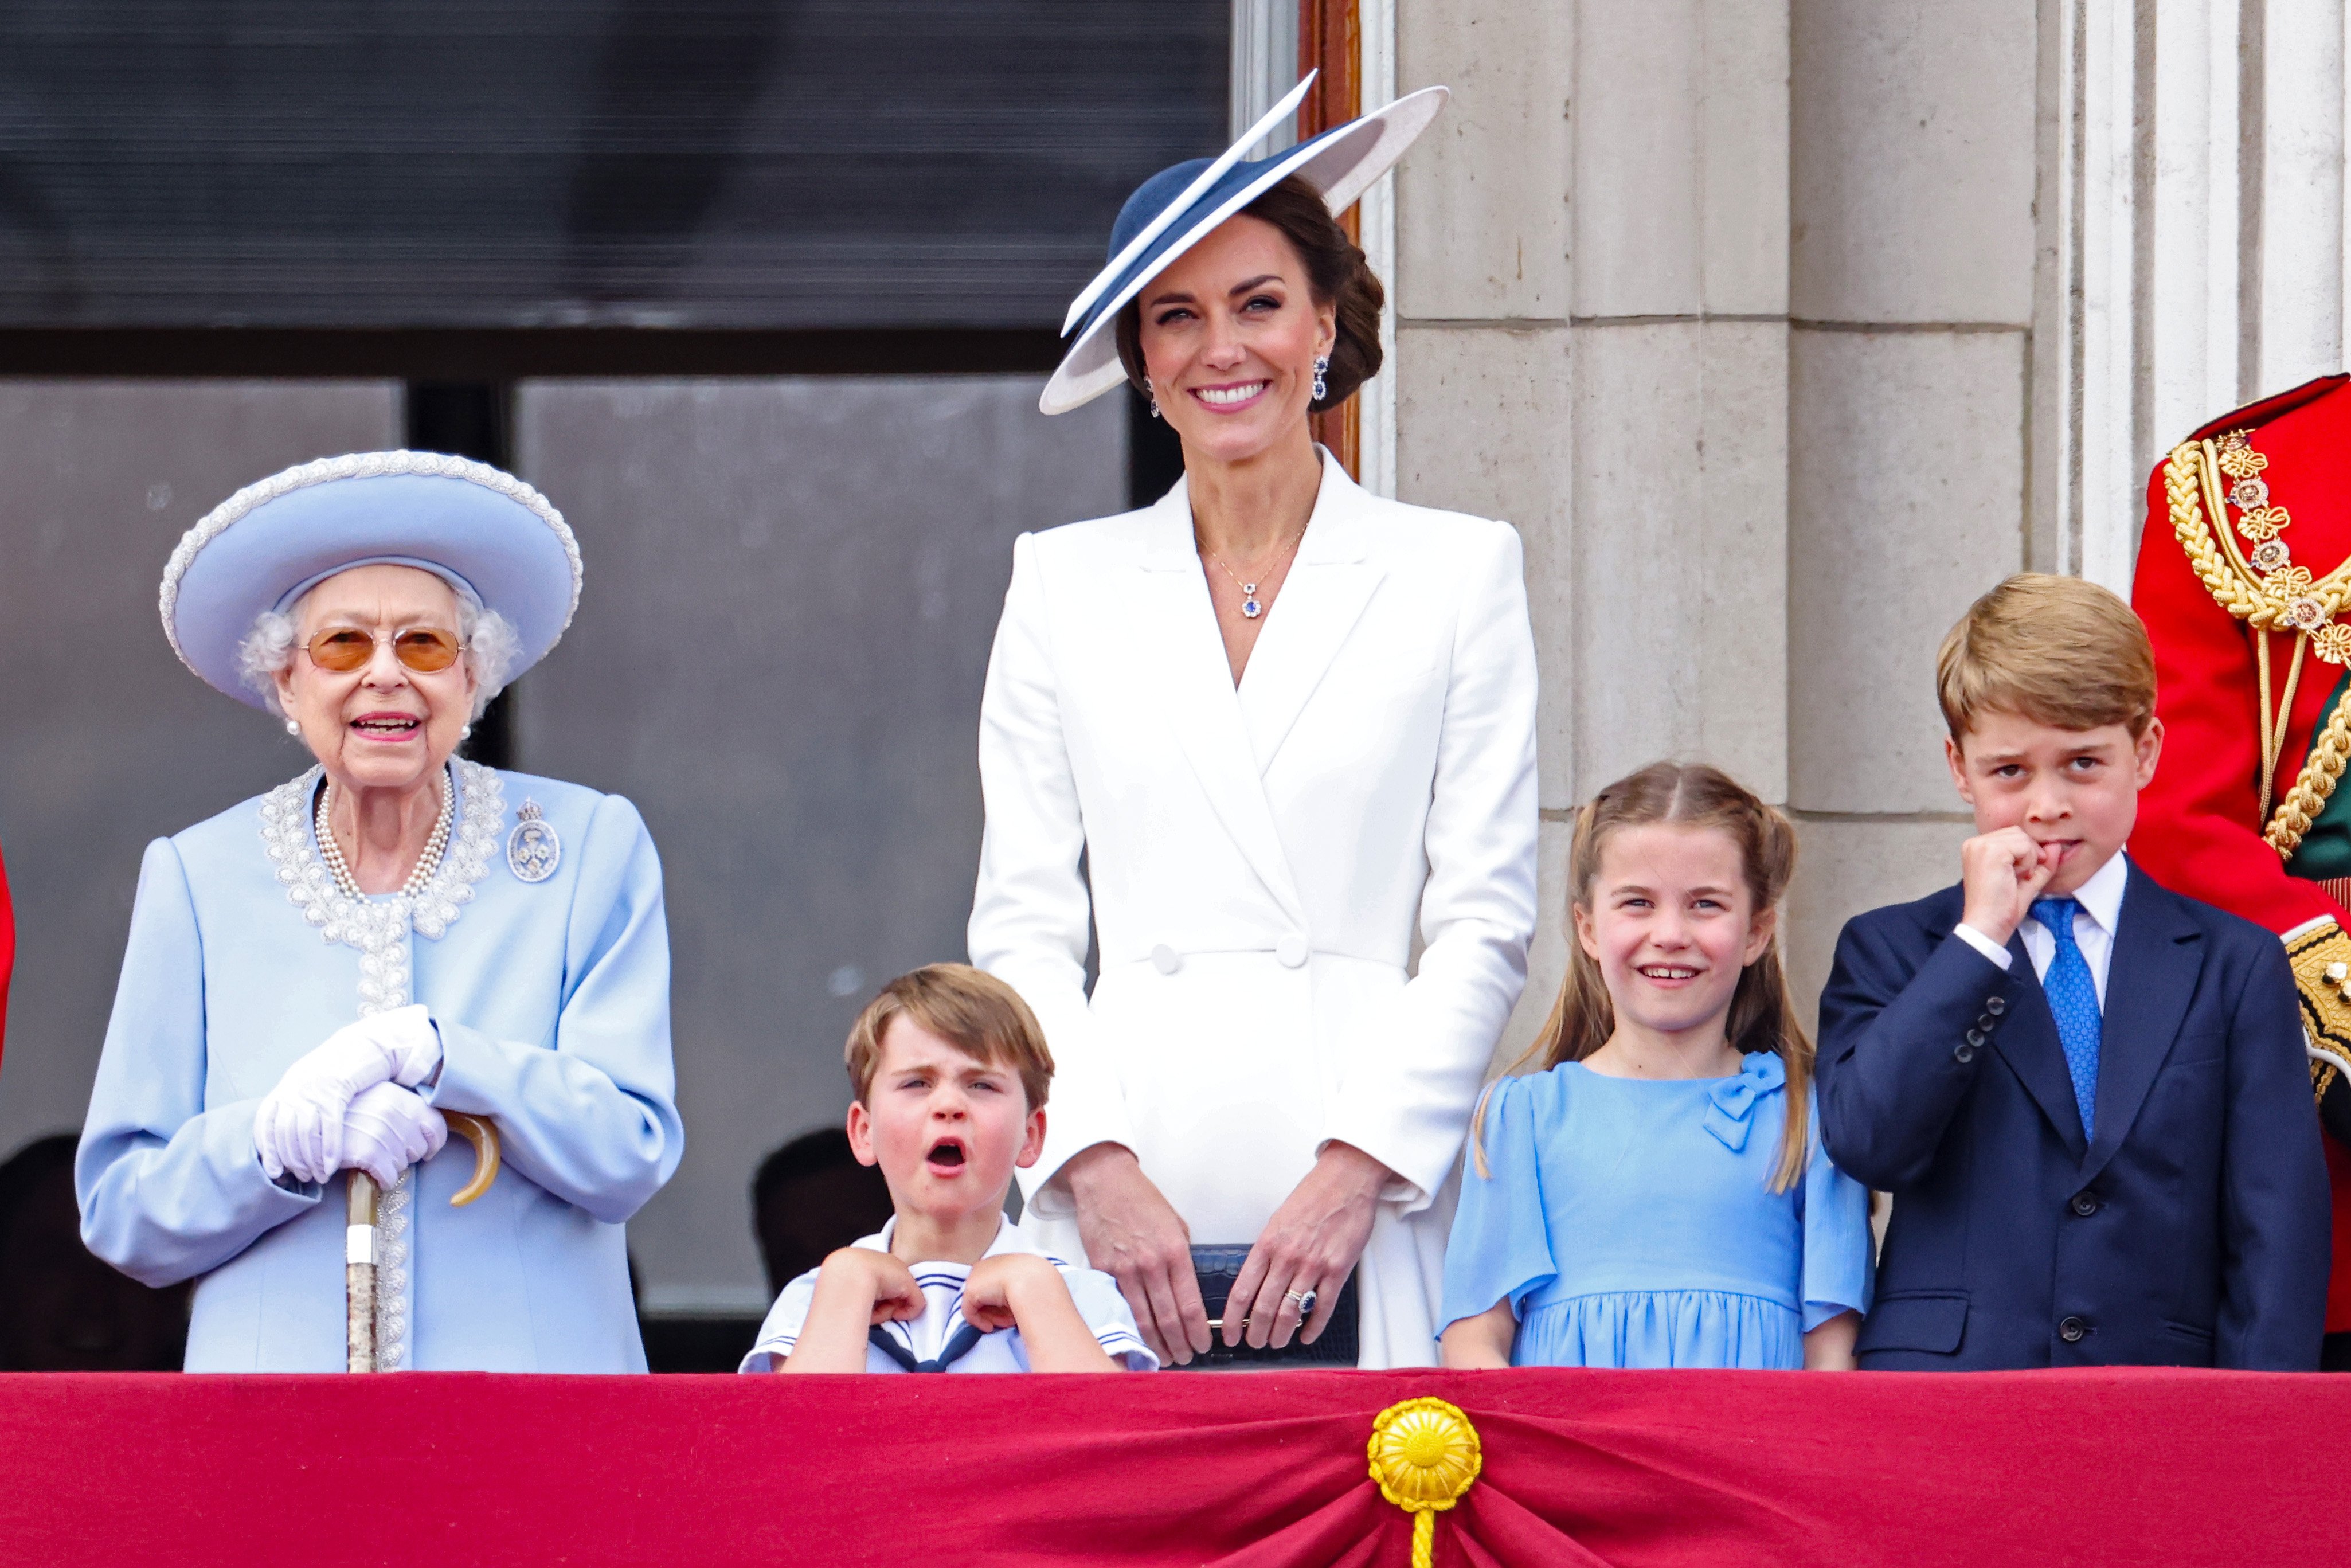 Queen Elizabeth II, Prince Louis, Catherine, and Princess Charlotte watch the RAF flypast from the balcony of Buckingham Palace during the Trooping the Color parade on June 02, 2022, in London, England. | Source: Getty Images